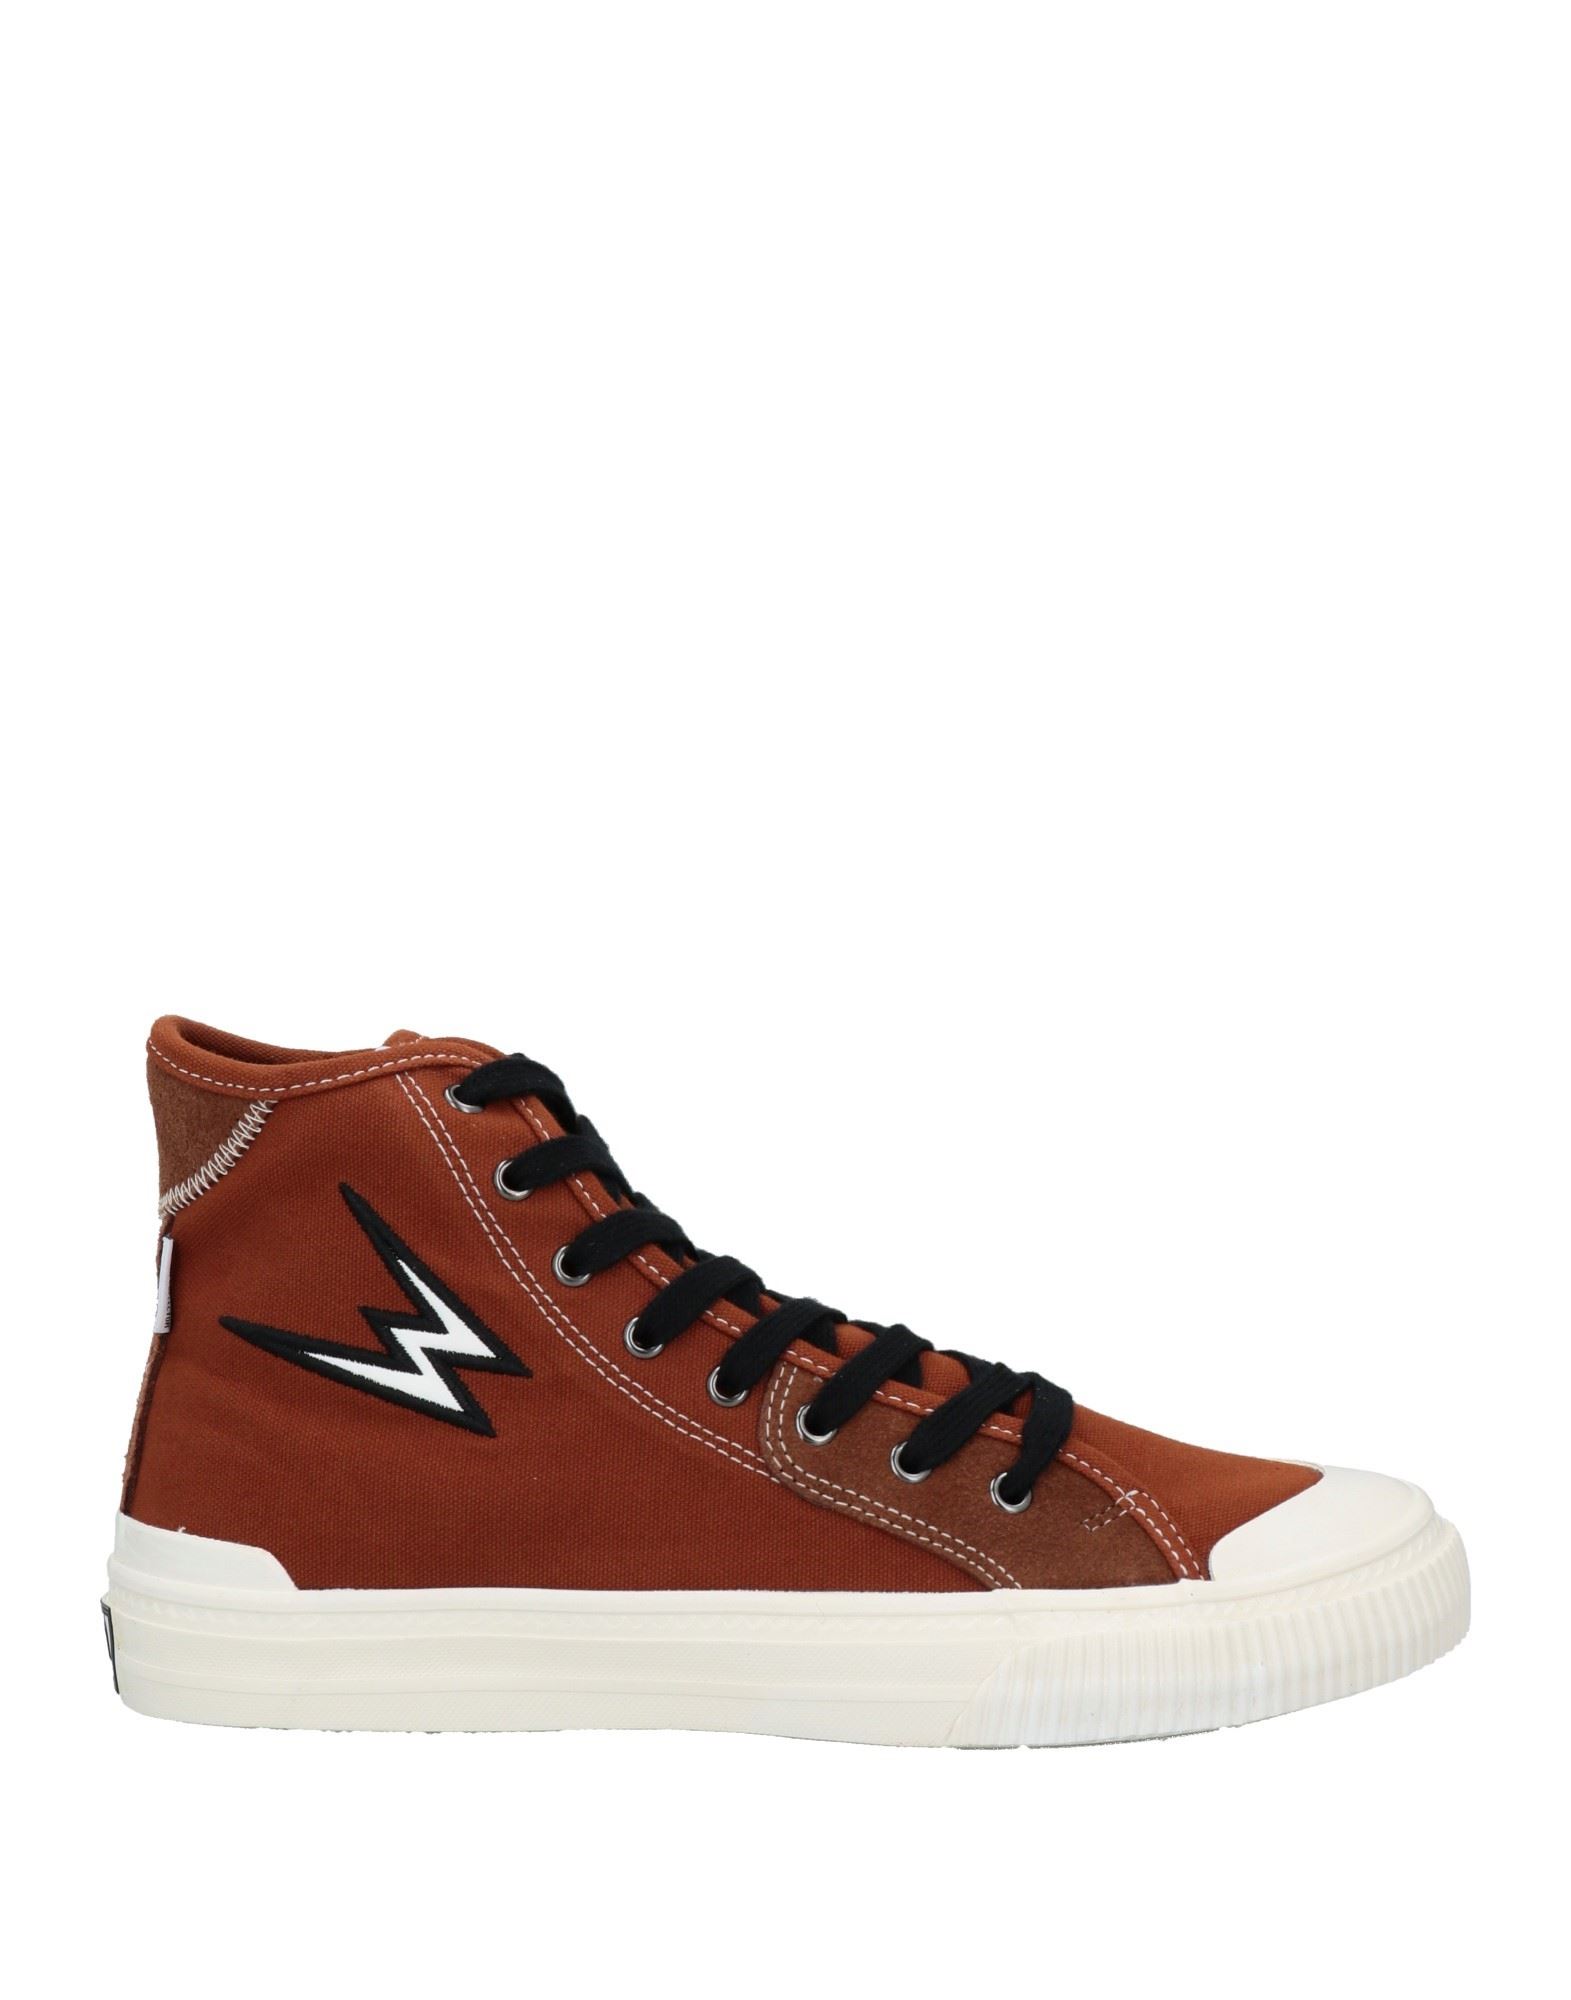 Moa Master Of Arts Sneakers In Tan